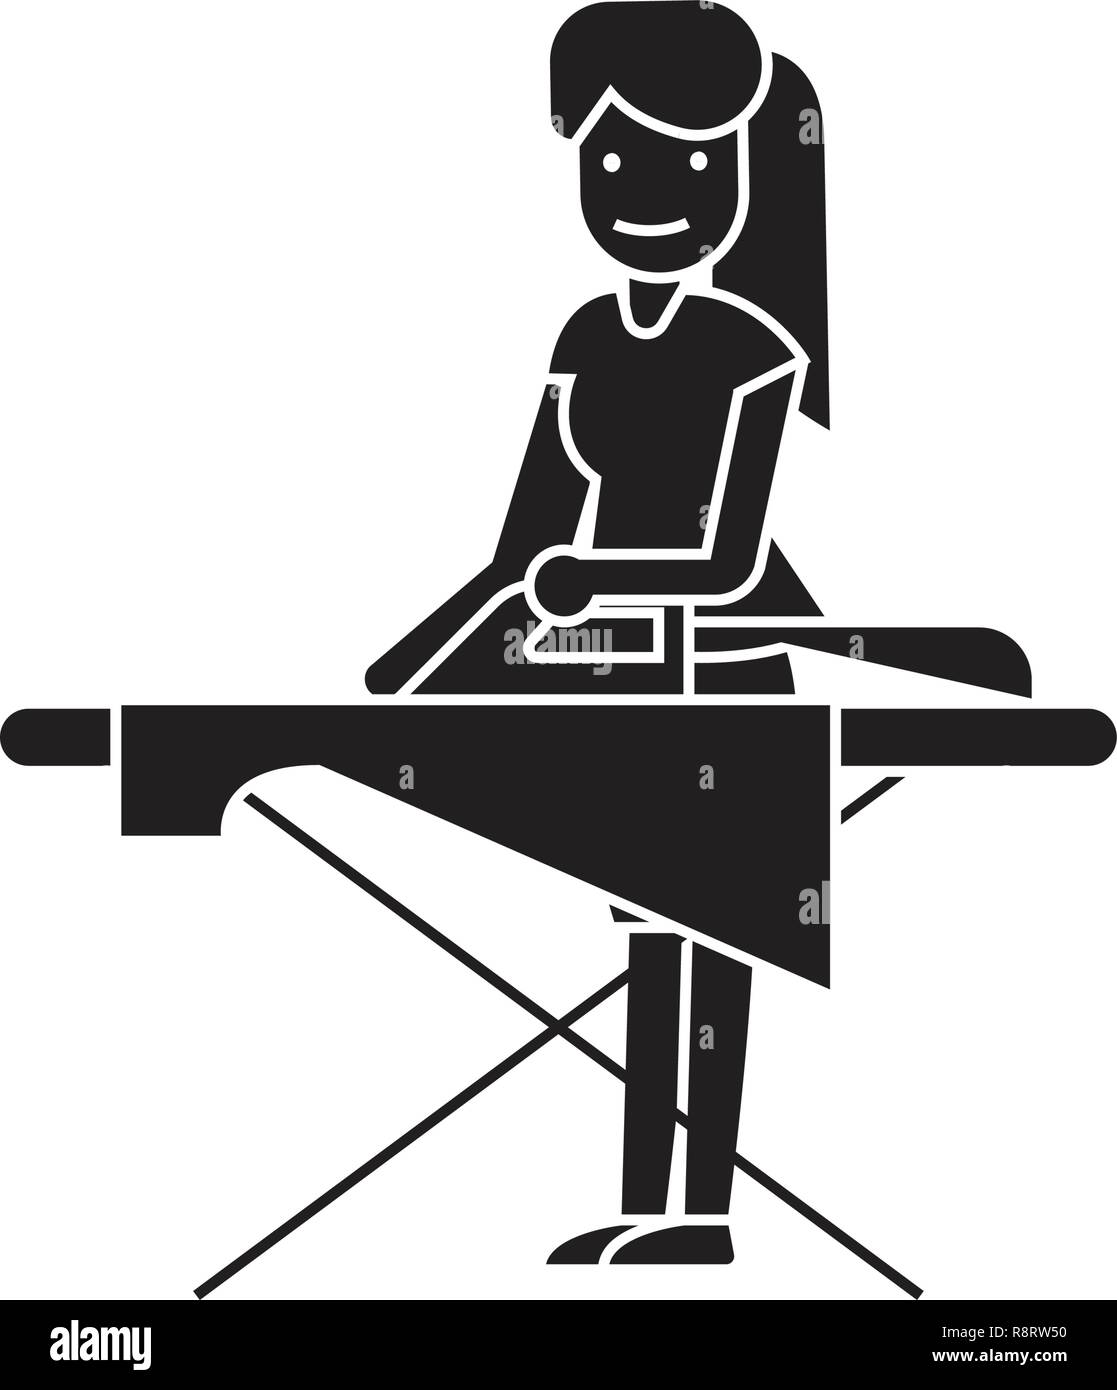 Woman ironing black vector concept icon. Woman ironing flat illustration, sign Stock Vector